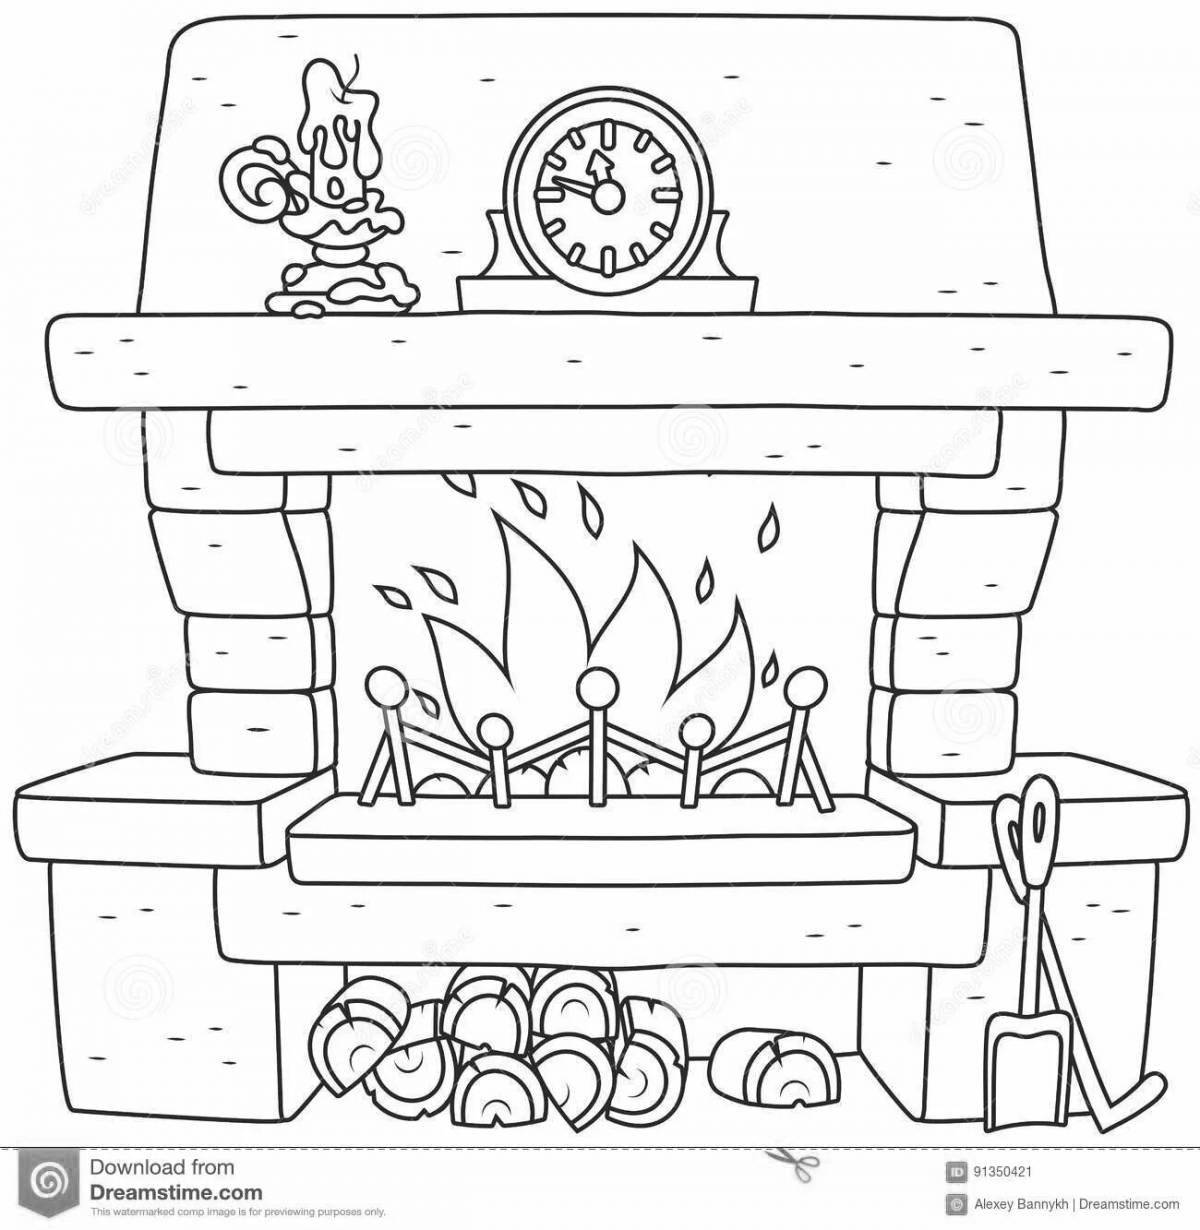 Amazing coloring pages with a fireplace for kids